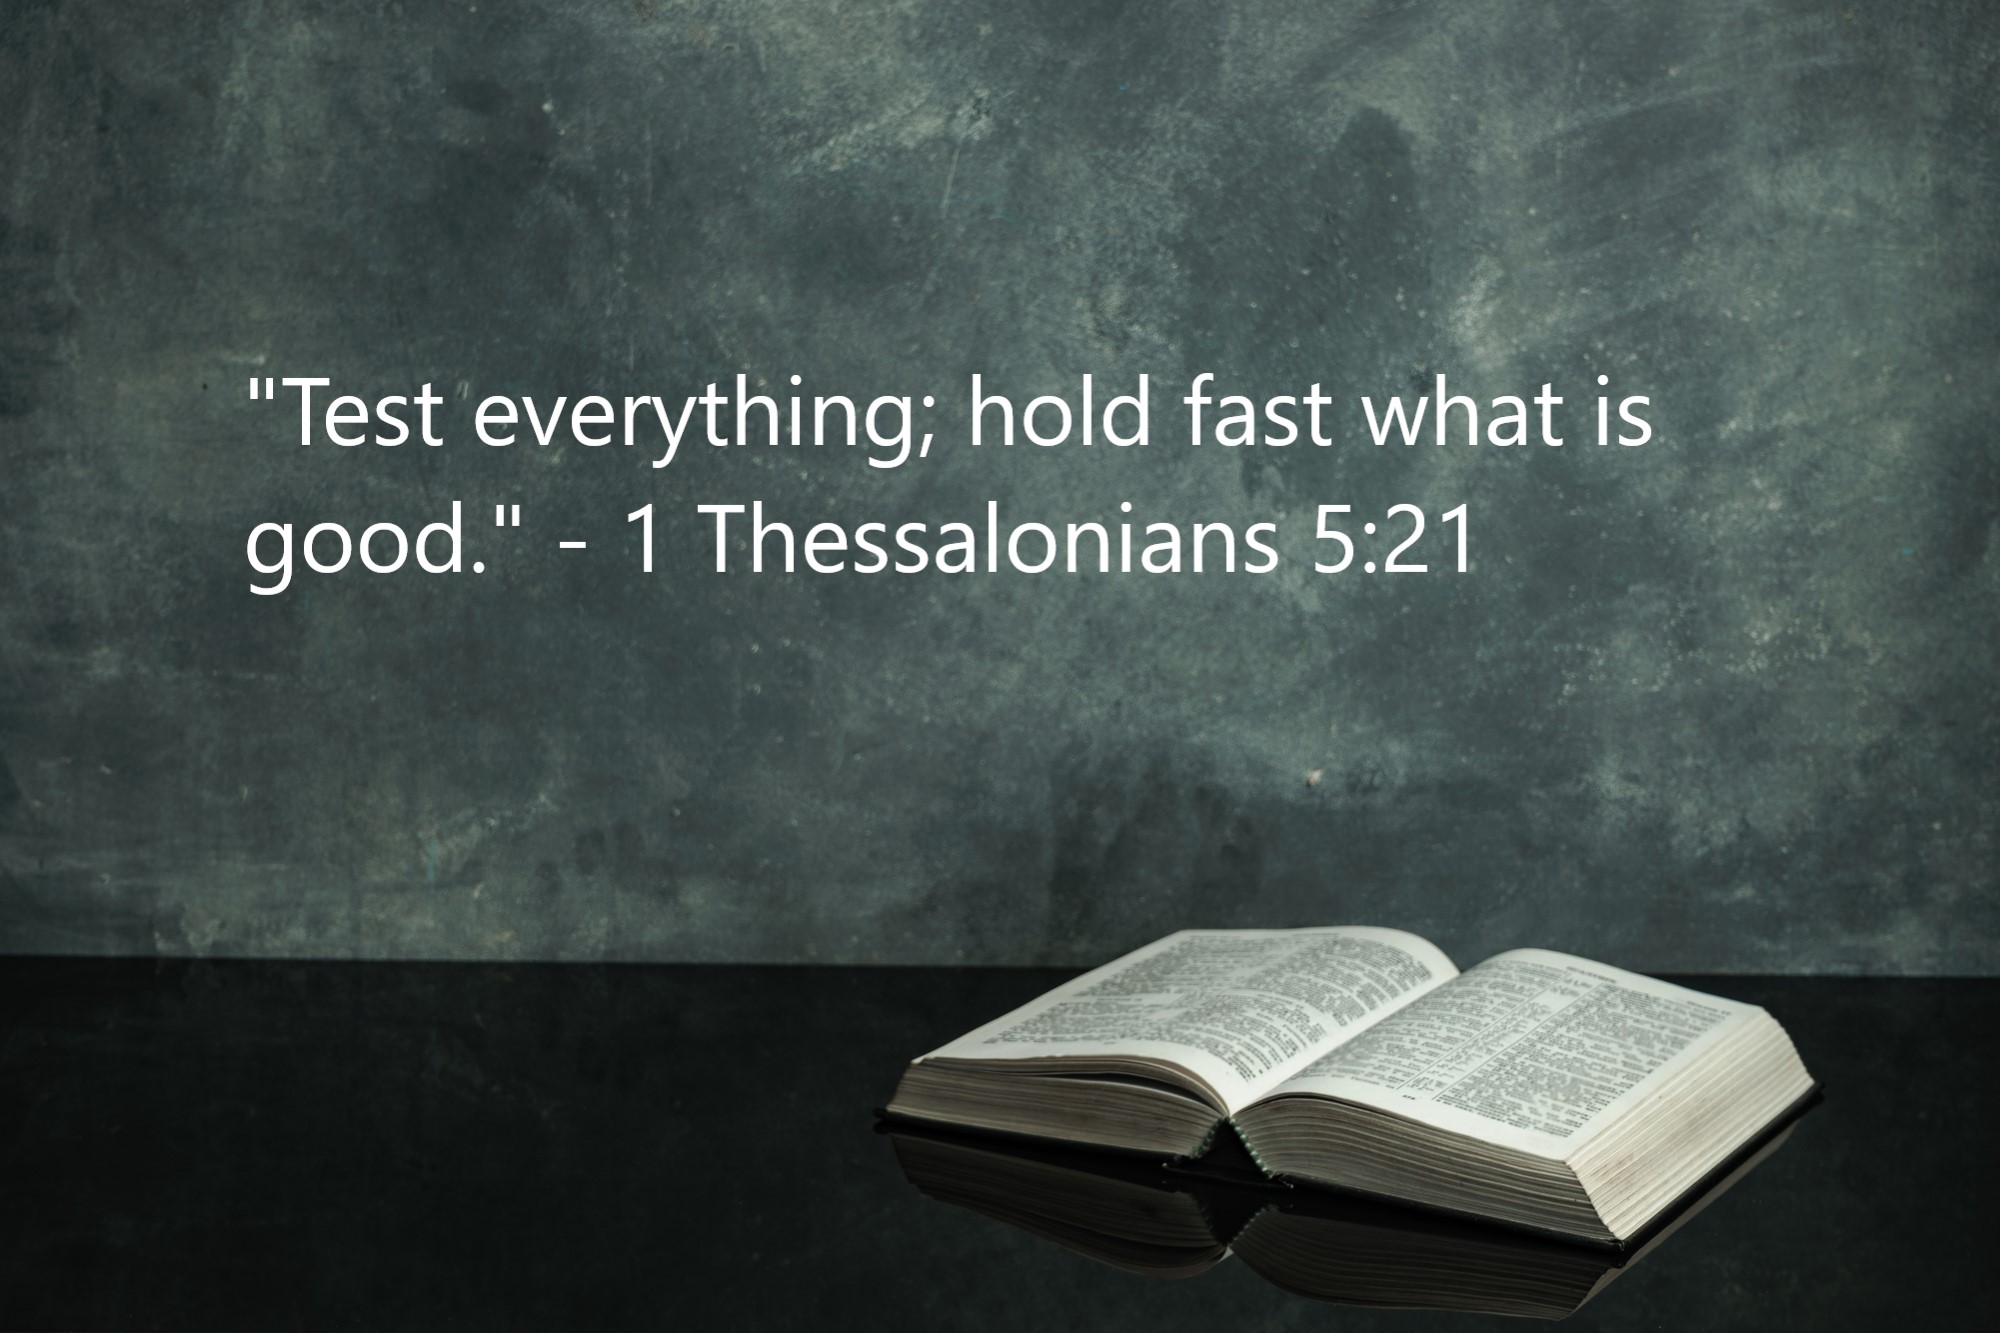 "Test everything; hold fast what is good." - 1 Thessalonians 5:21